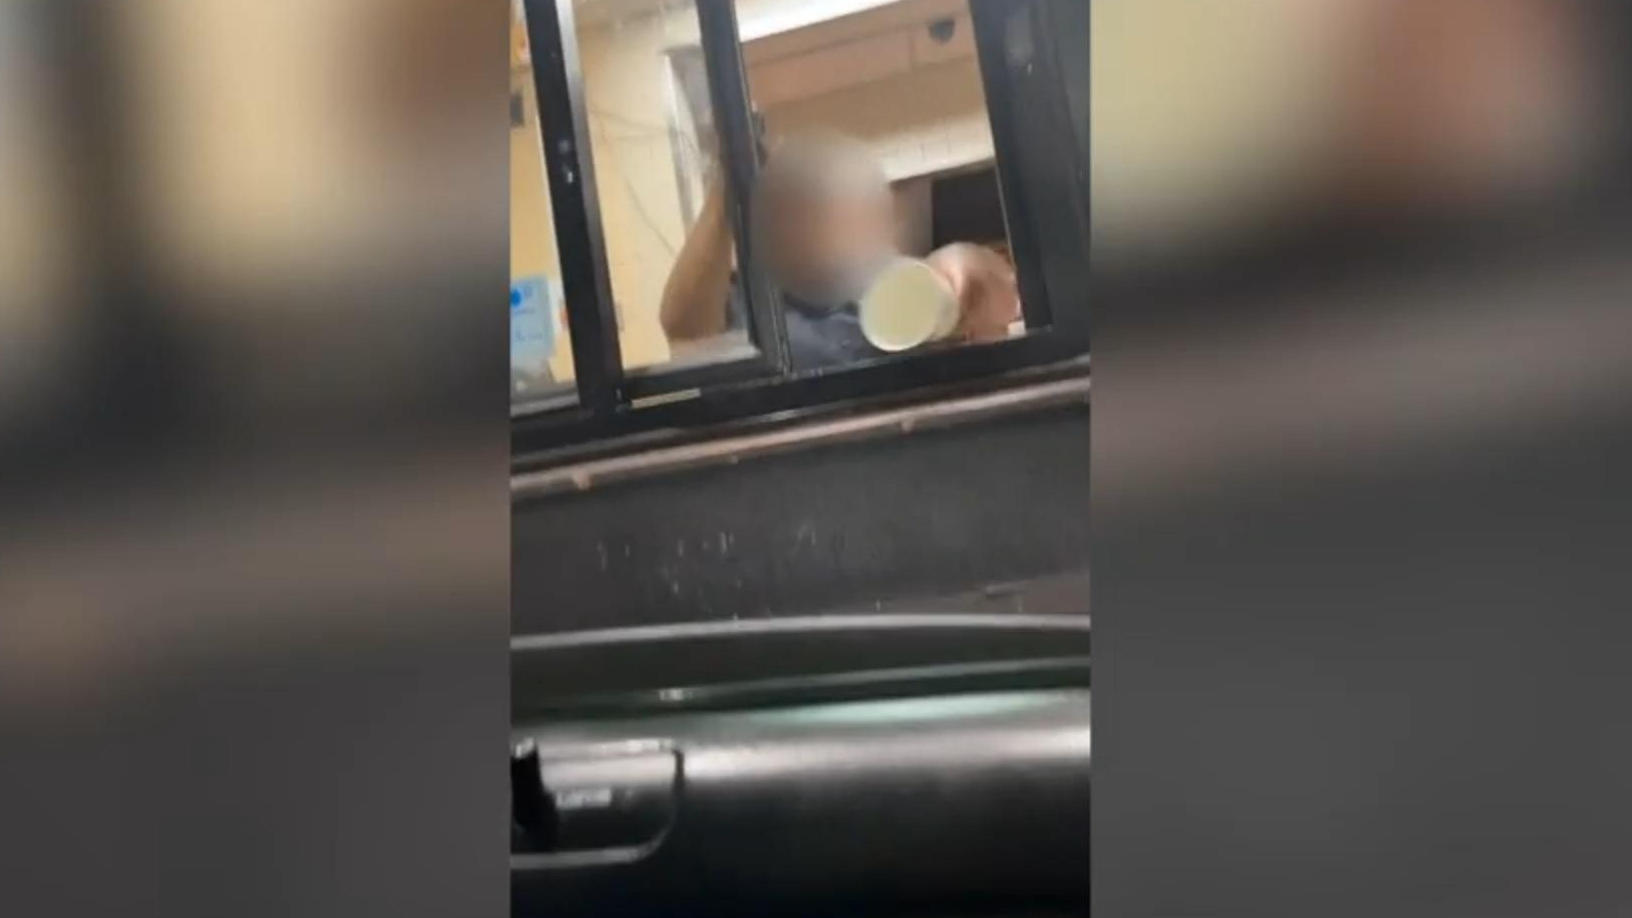 A McDonald's employee pours water in the woman's face, the argument must have escalated